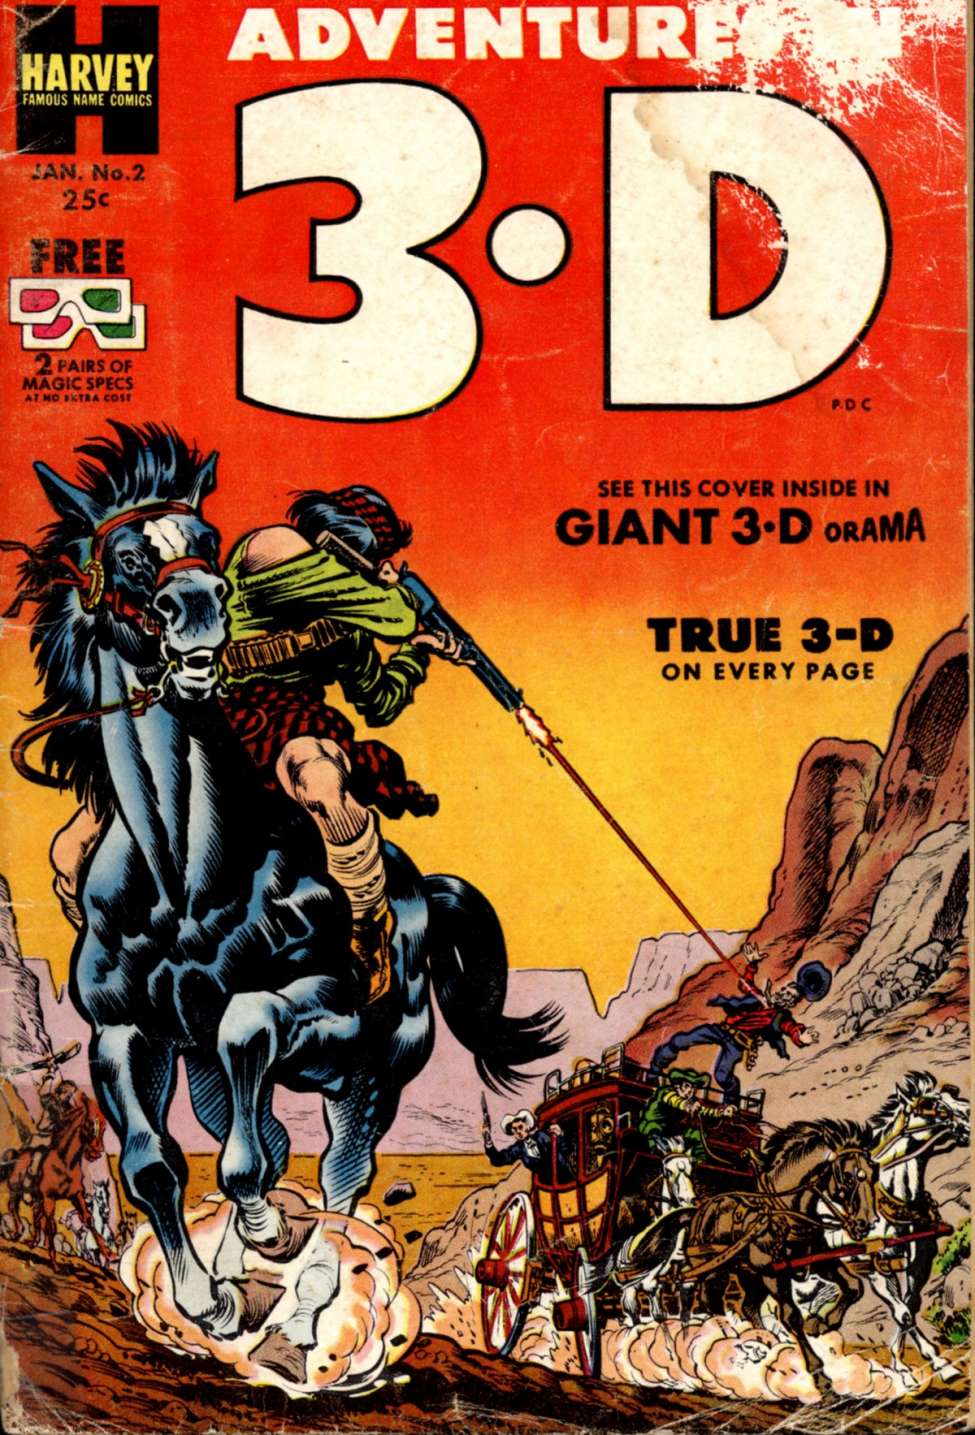 Book Cover For Adventures in 3-D 2